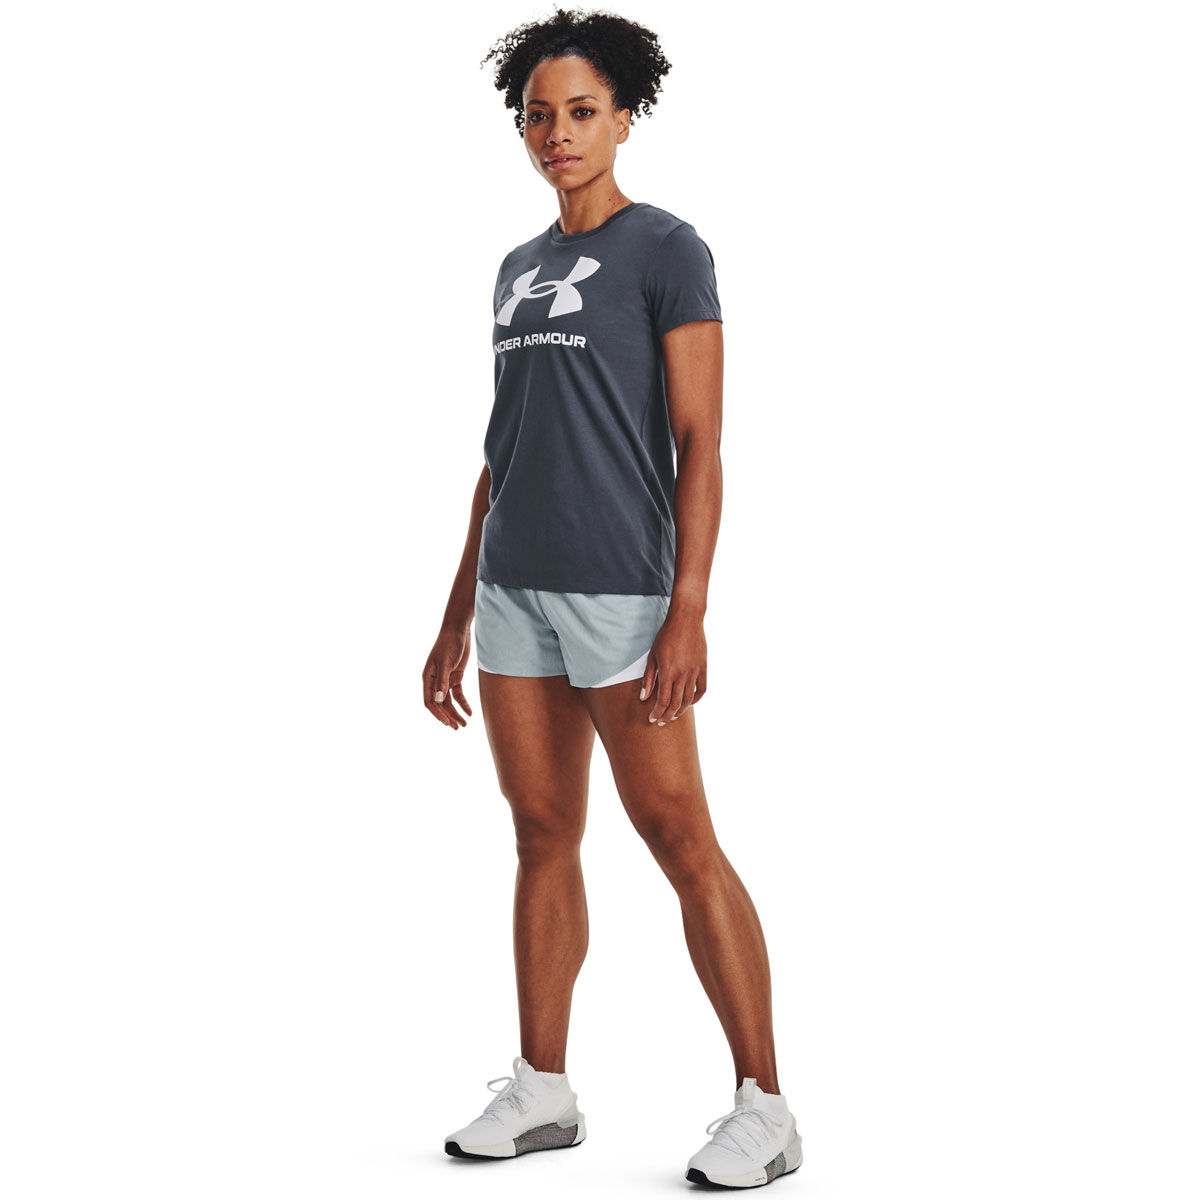 Under Armour Womens Sportstyle Graphic Tee